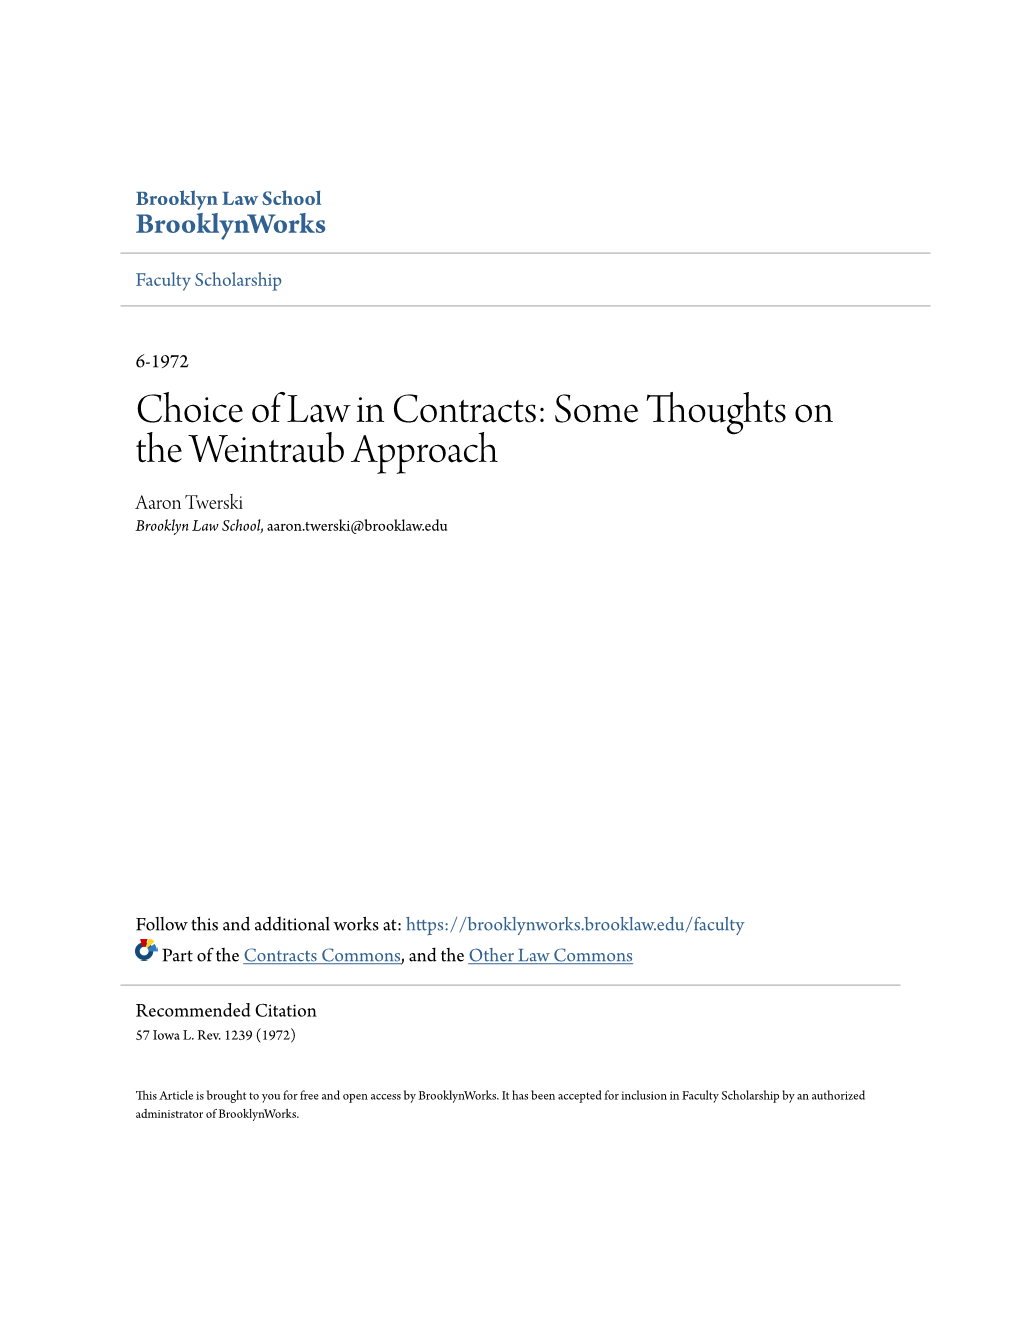 Choice of Law in Contracts: Some Thoughts on the Weintraub Approach Aaron Twerski Brooklyn Law School, Aaron.Twerski@Brooklaw.Edu